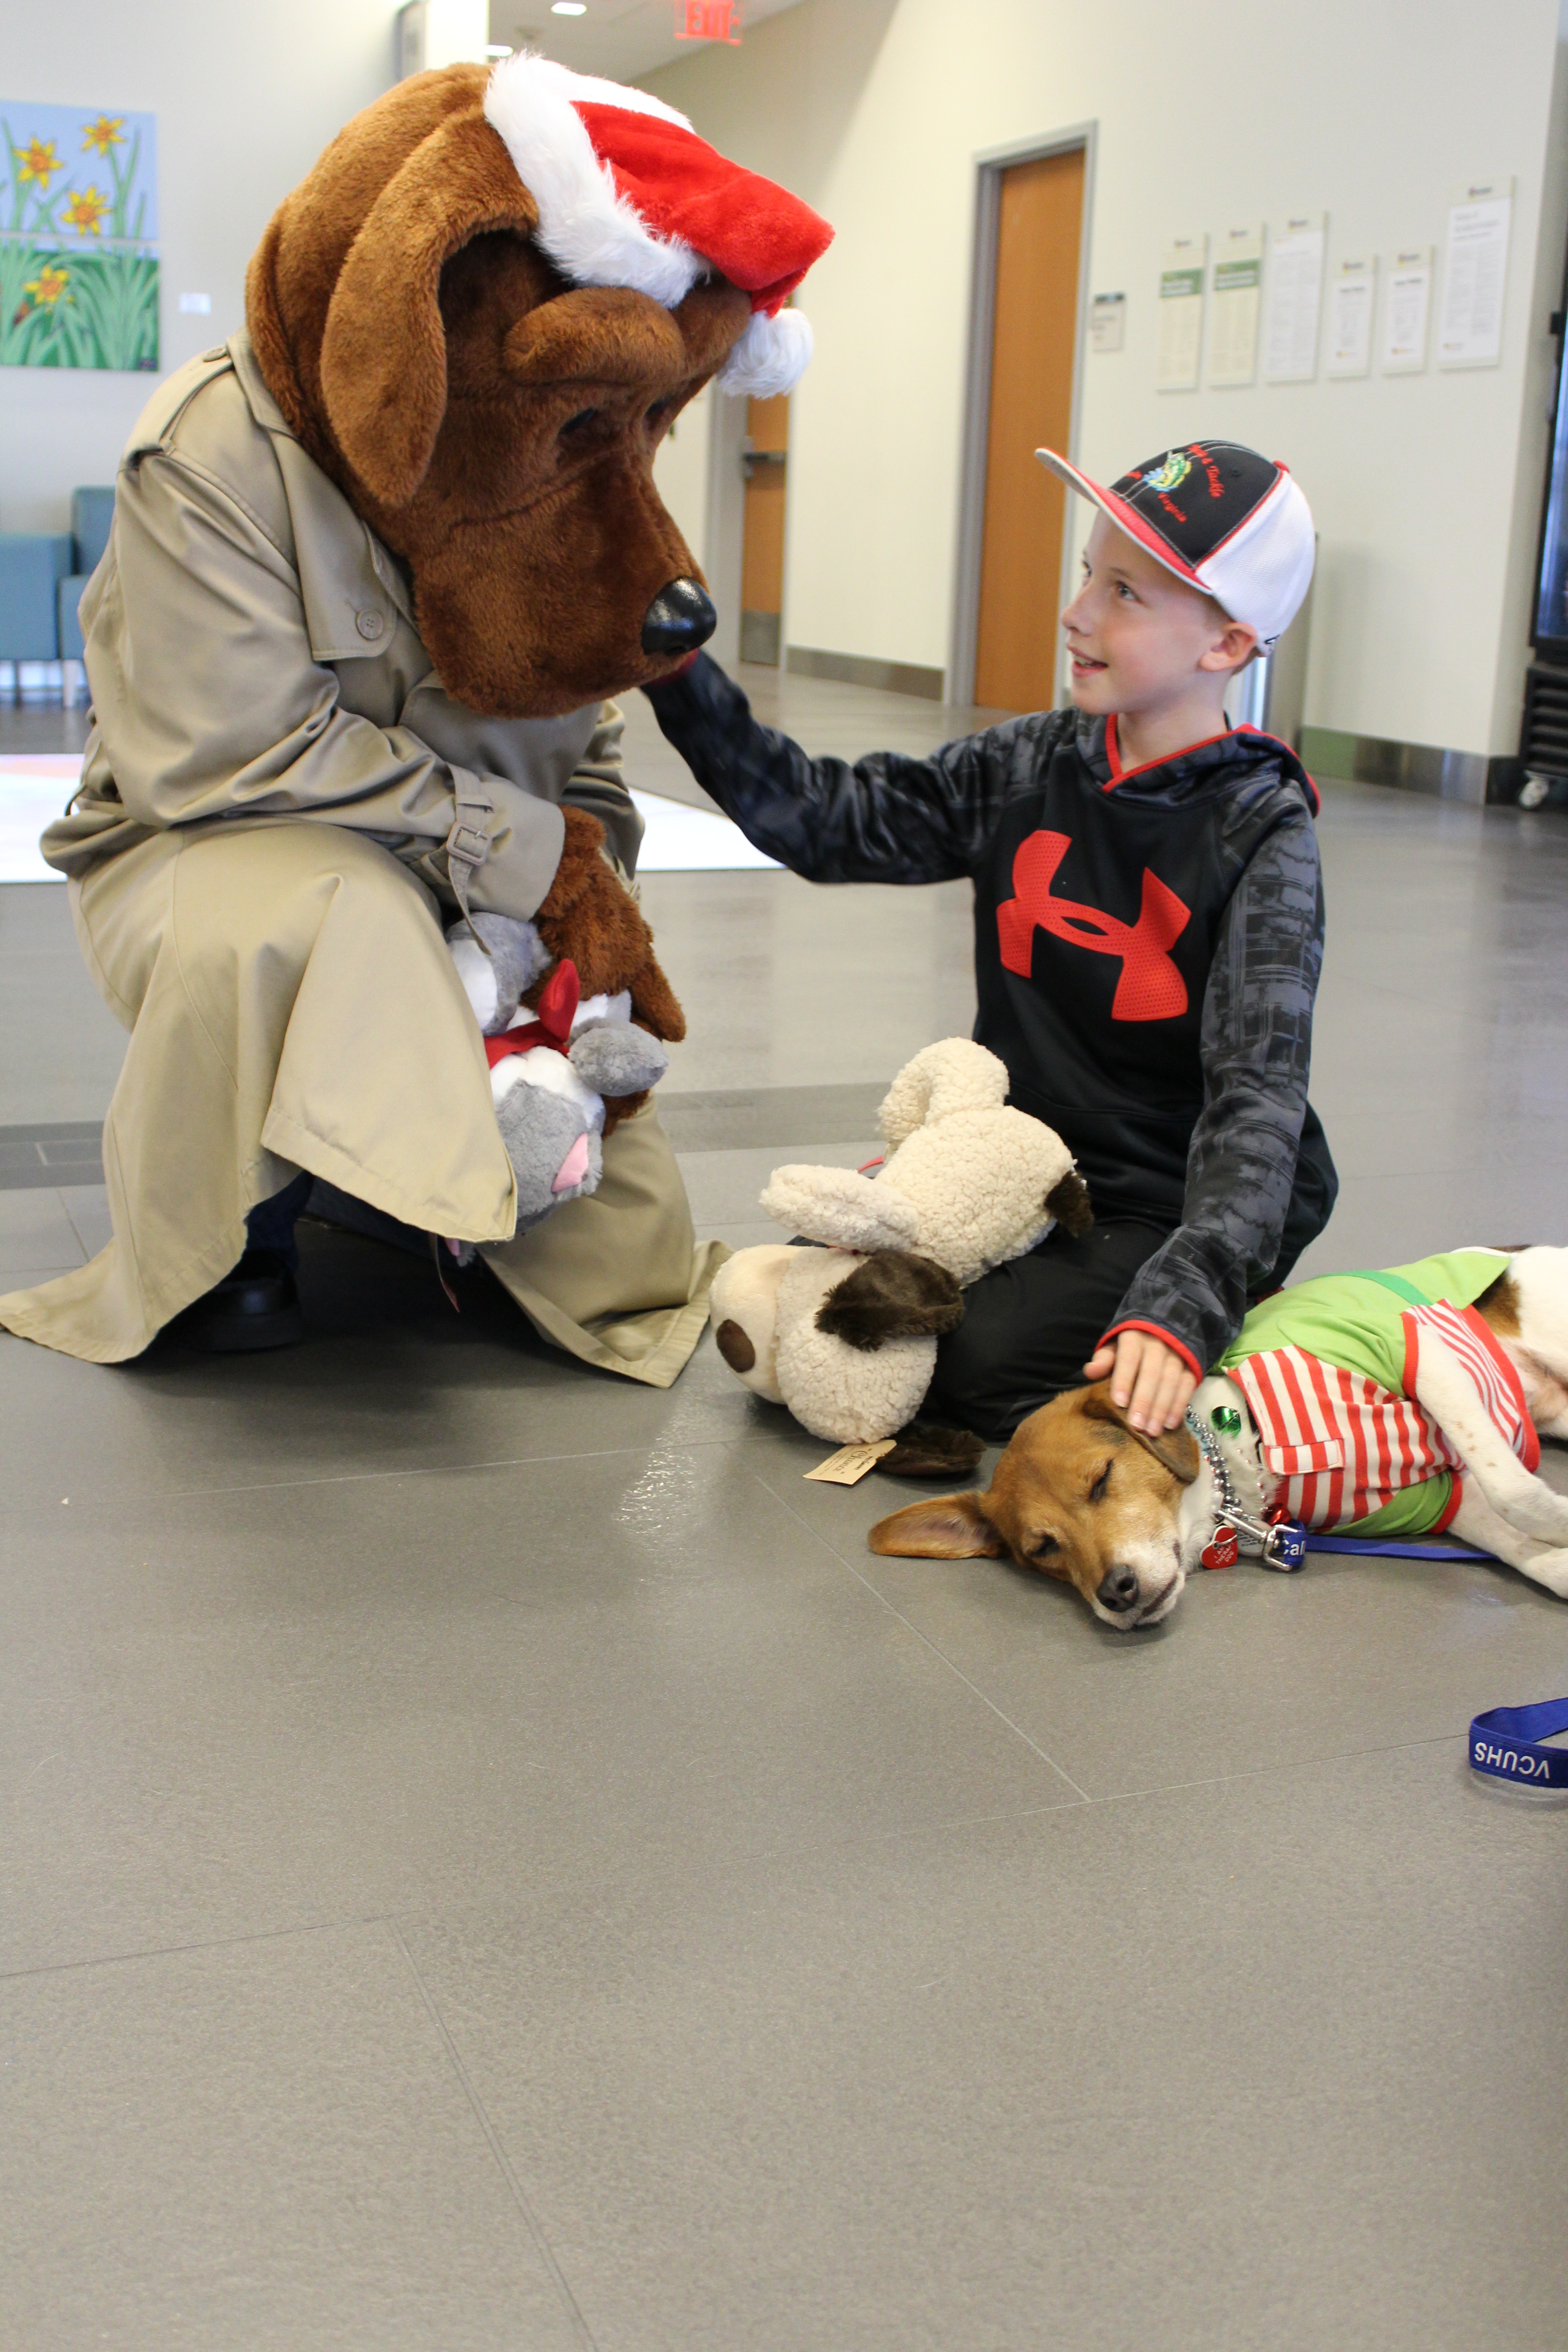  McGruff, the V C U Police mascot and therapy dog Blake, a beagle mix, each receive pets from a generous friend sitting in between them.